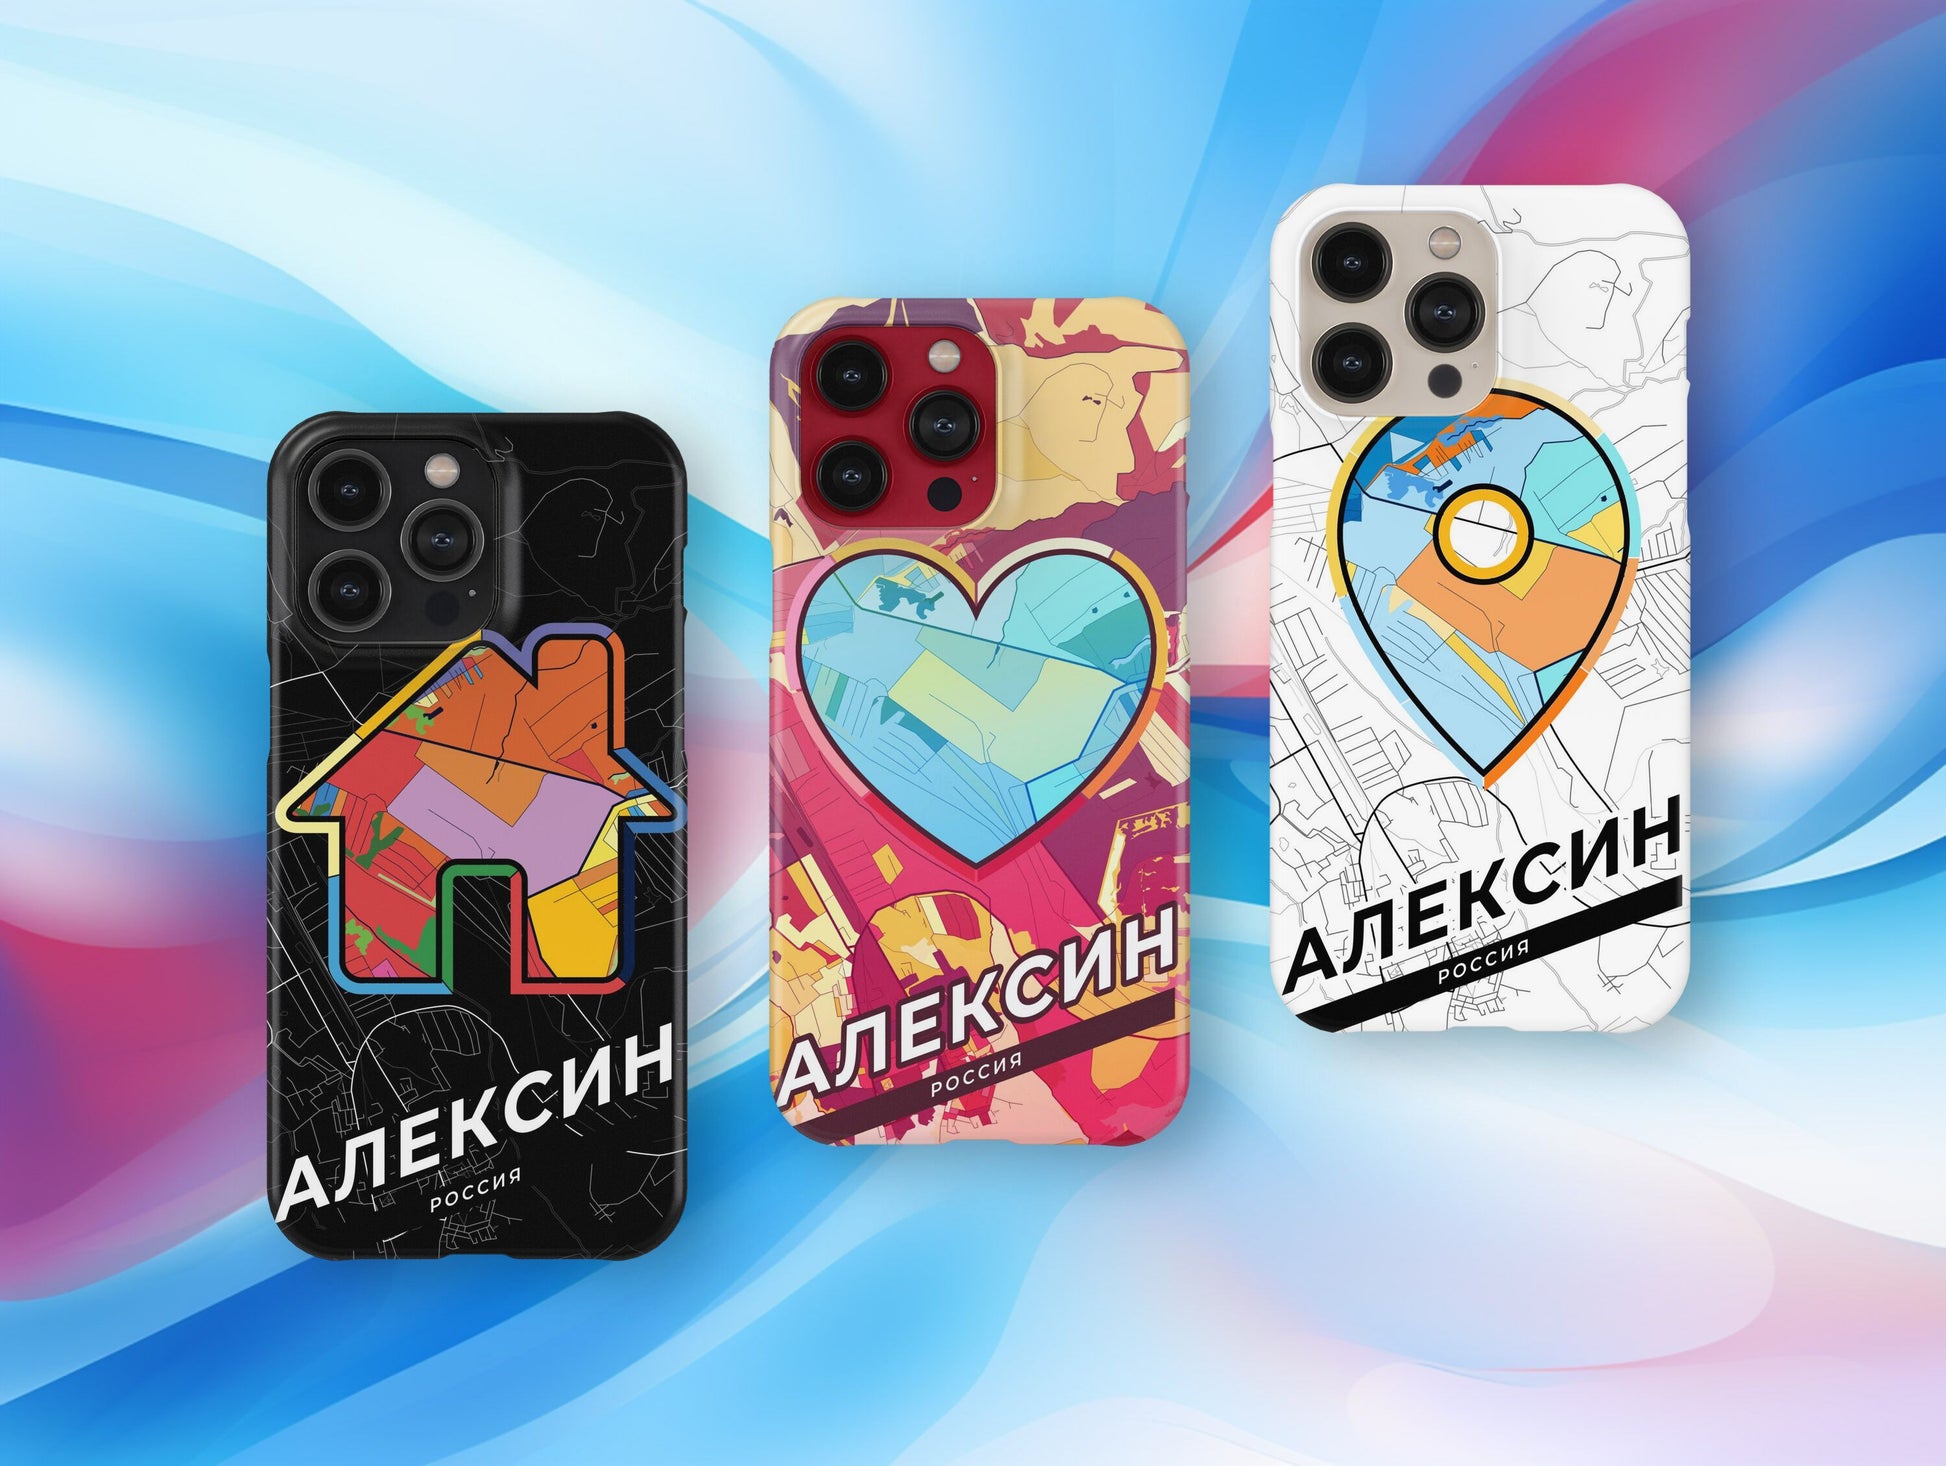 Aleksin Russia slim phone case with colorful icon. Birthday, wedding or housewarming gift. Couple match cases.